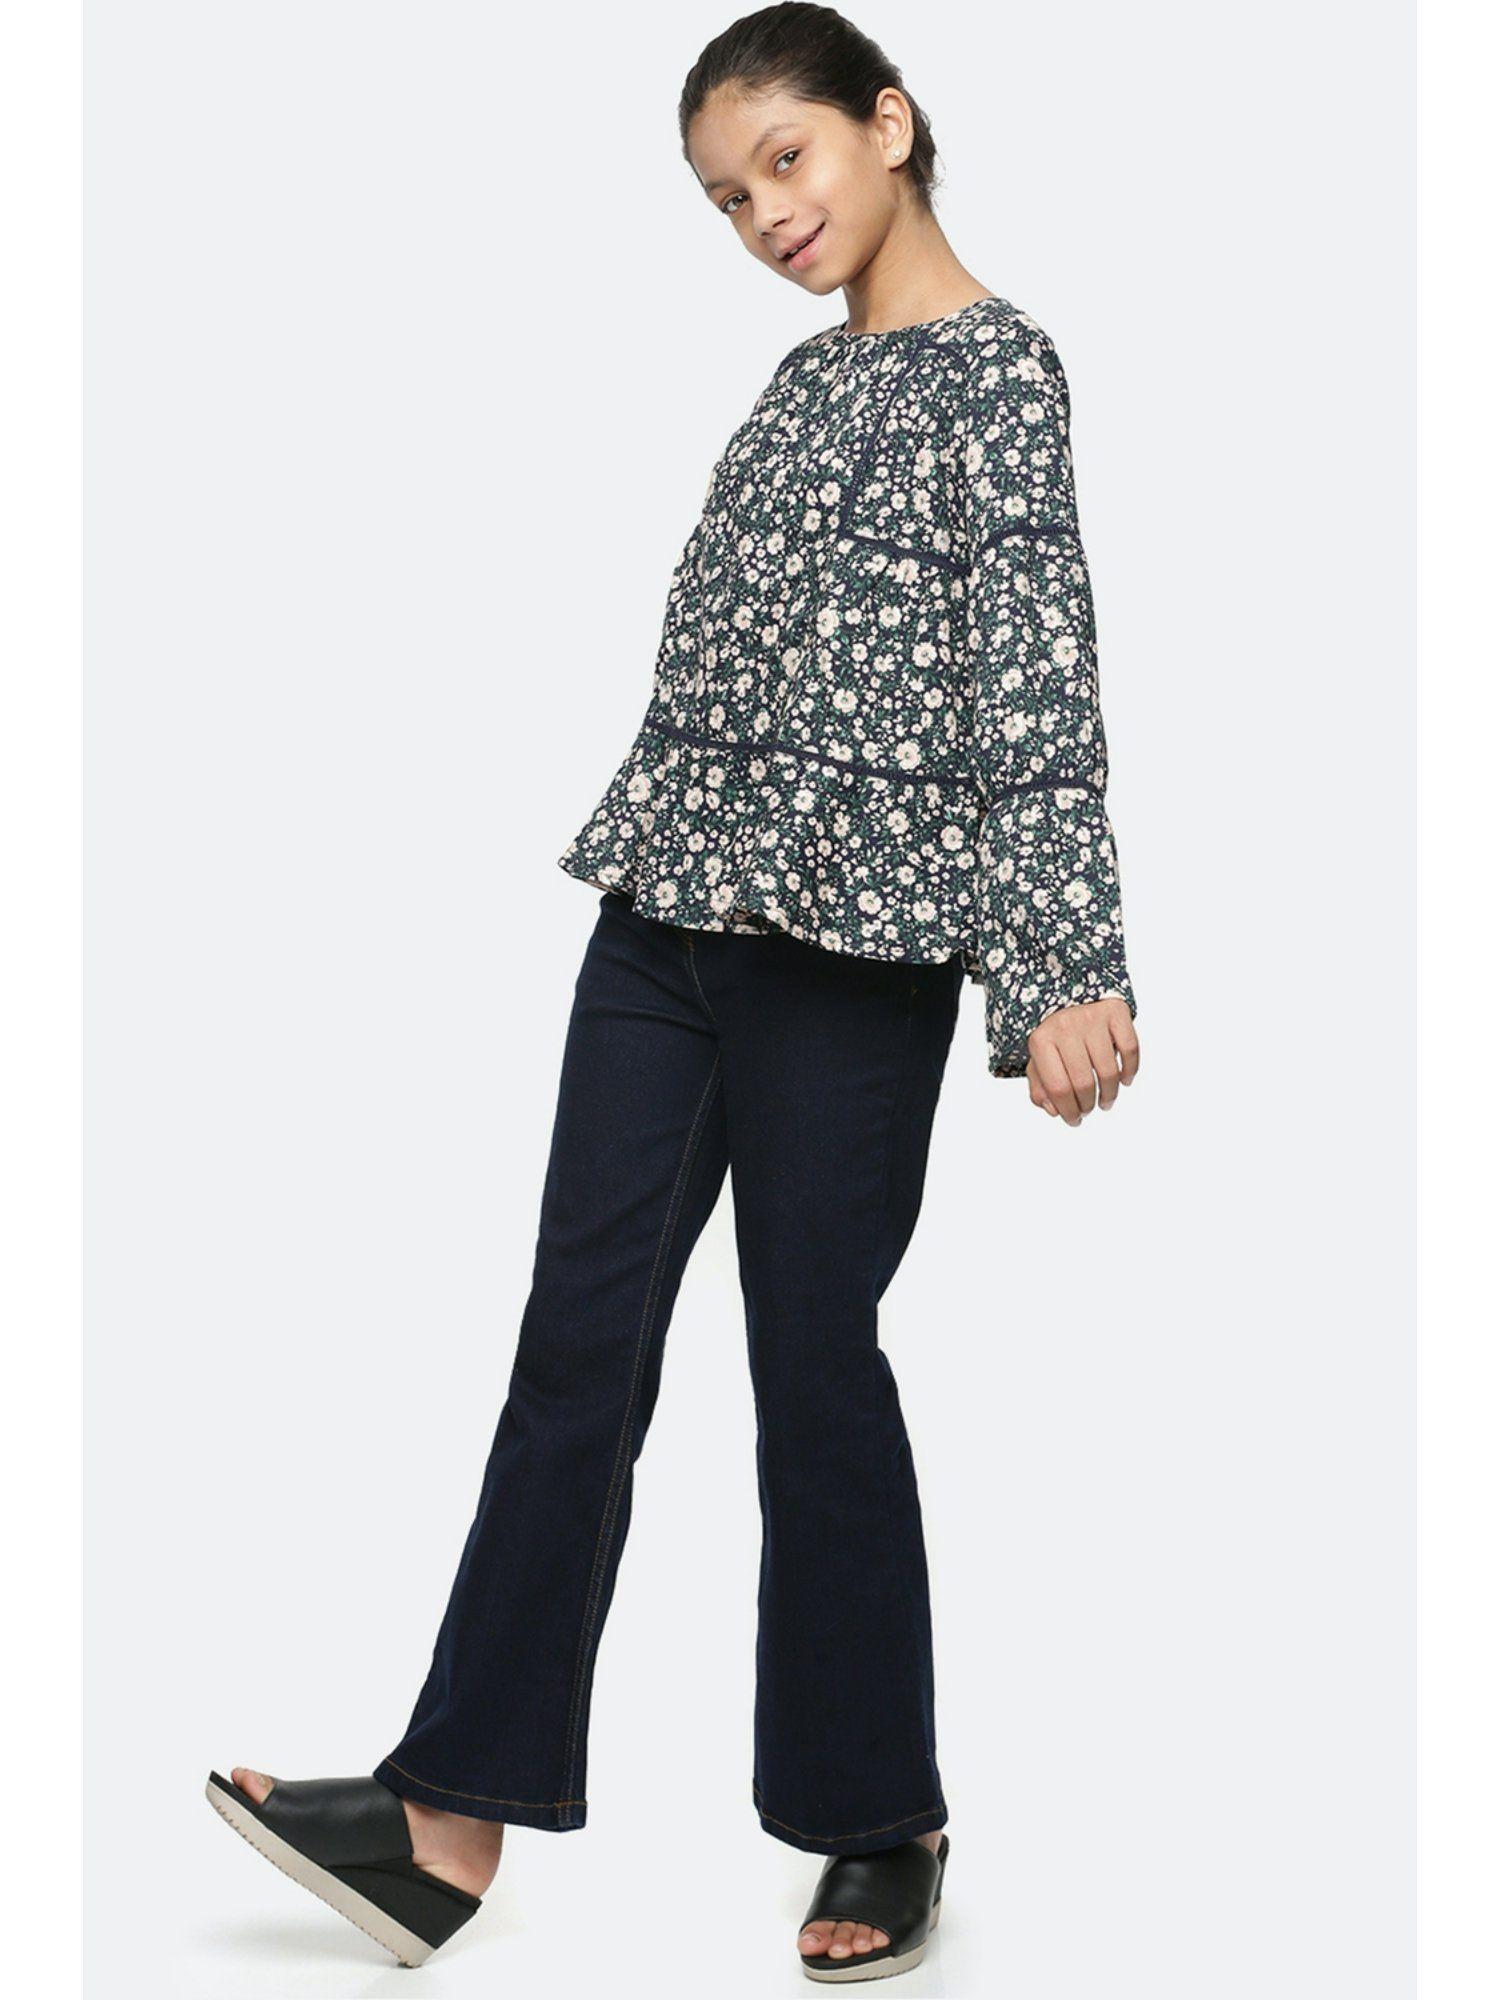 girls navy floral top